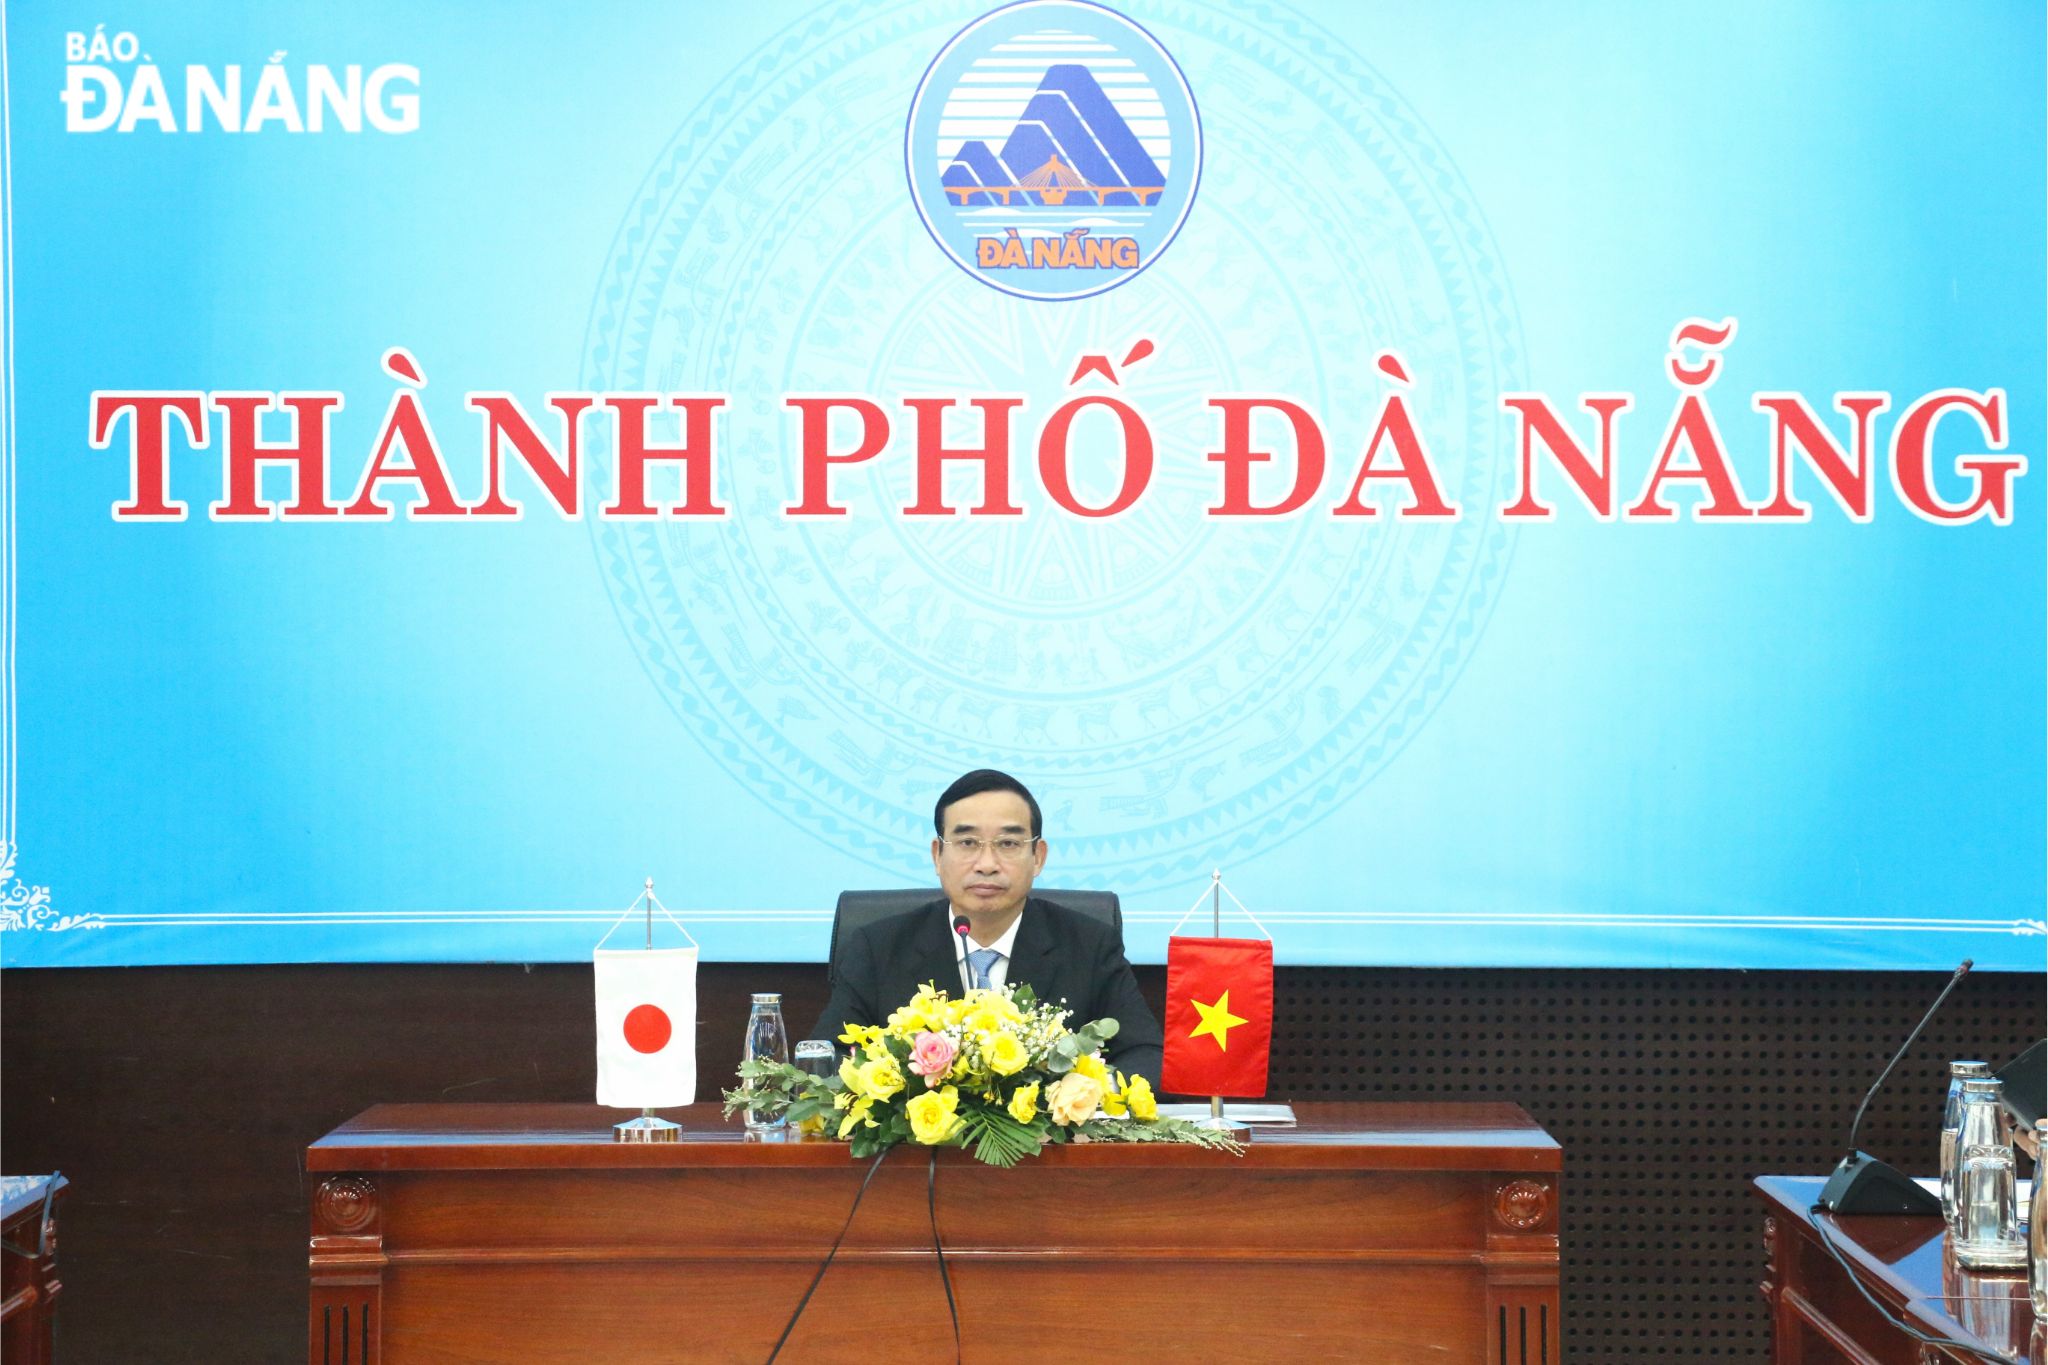 Da Nang People’s Committee Chairman Le Trung Chinh at the online meeting